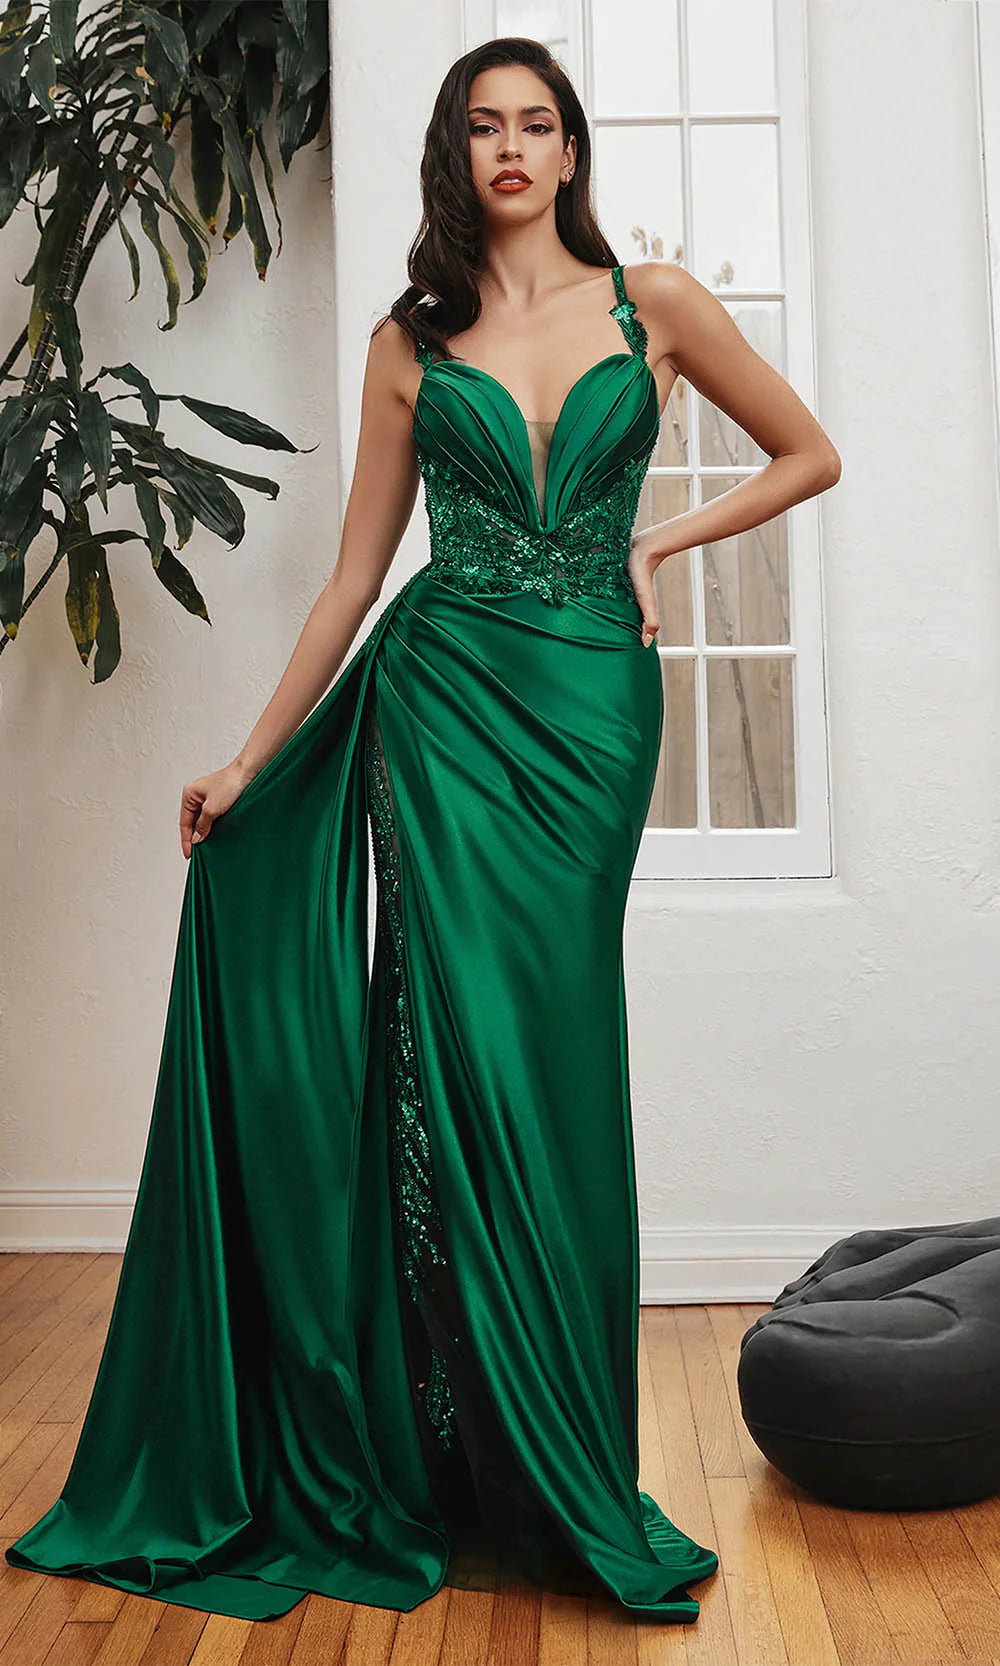 Ladivine CDS417 Embellished Fitted Evening Dress - Fitted silhouette with lace-embellished waistline, pleated bust, and beaded sheer leg slit.  Model is wearing the dress in emerald.